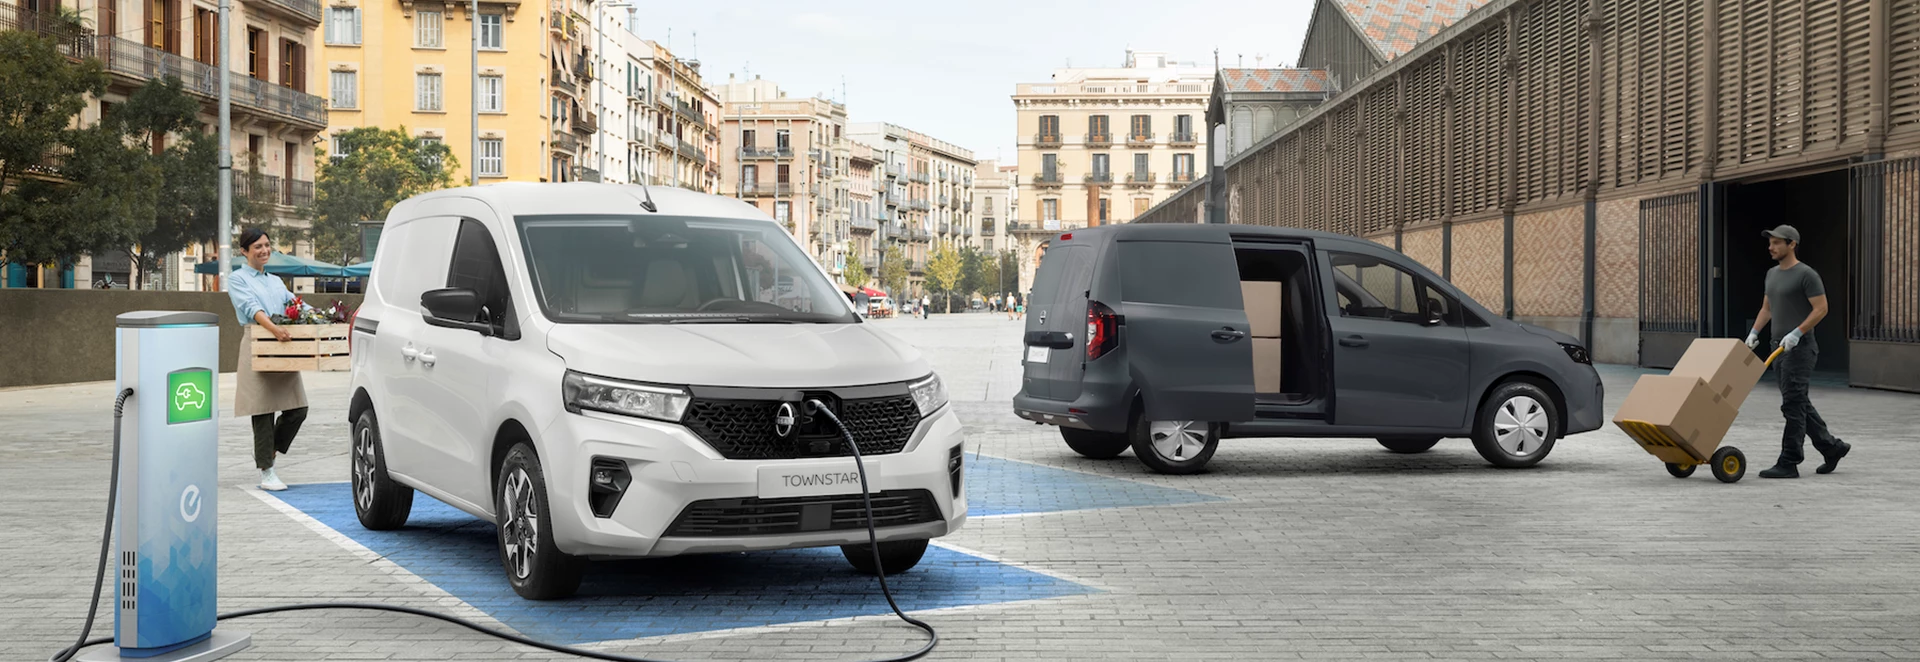 Nissan reveals new Townstar van as part of refreshed LCV range 